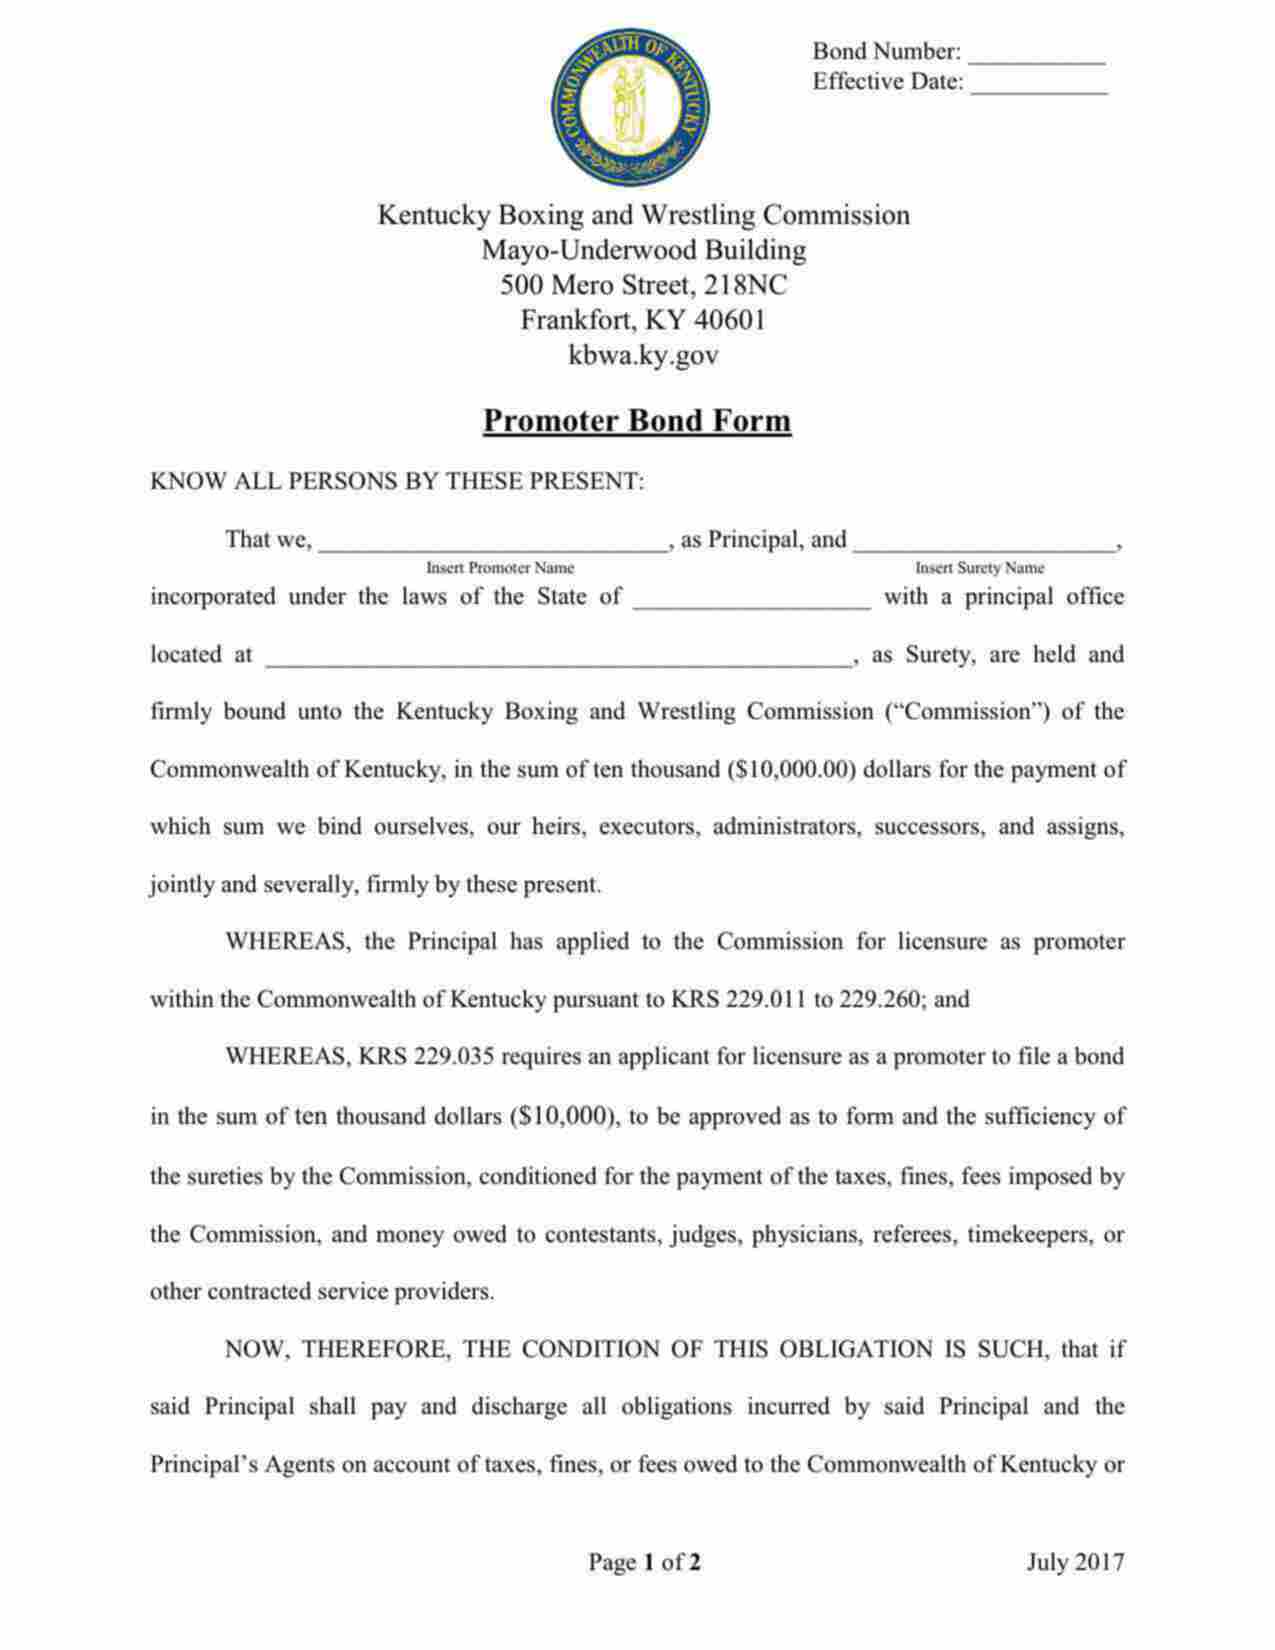 Kentucky Boxing and Wrestling Athletic Promoter Bond Form